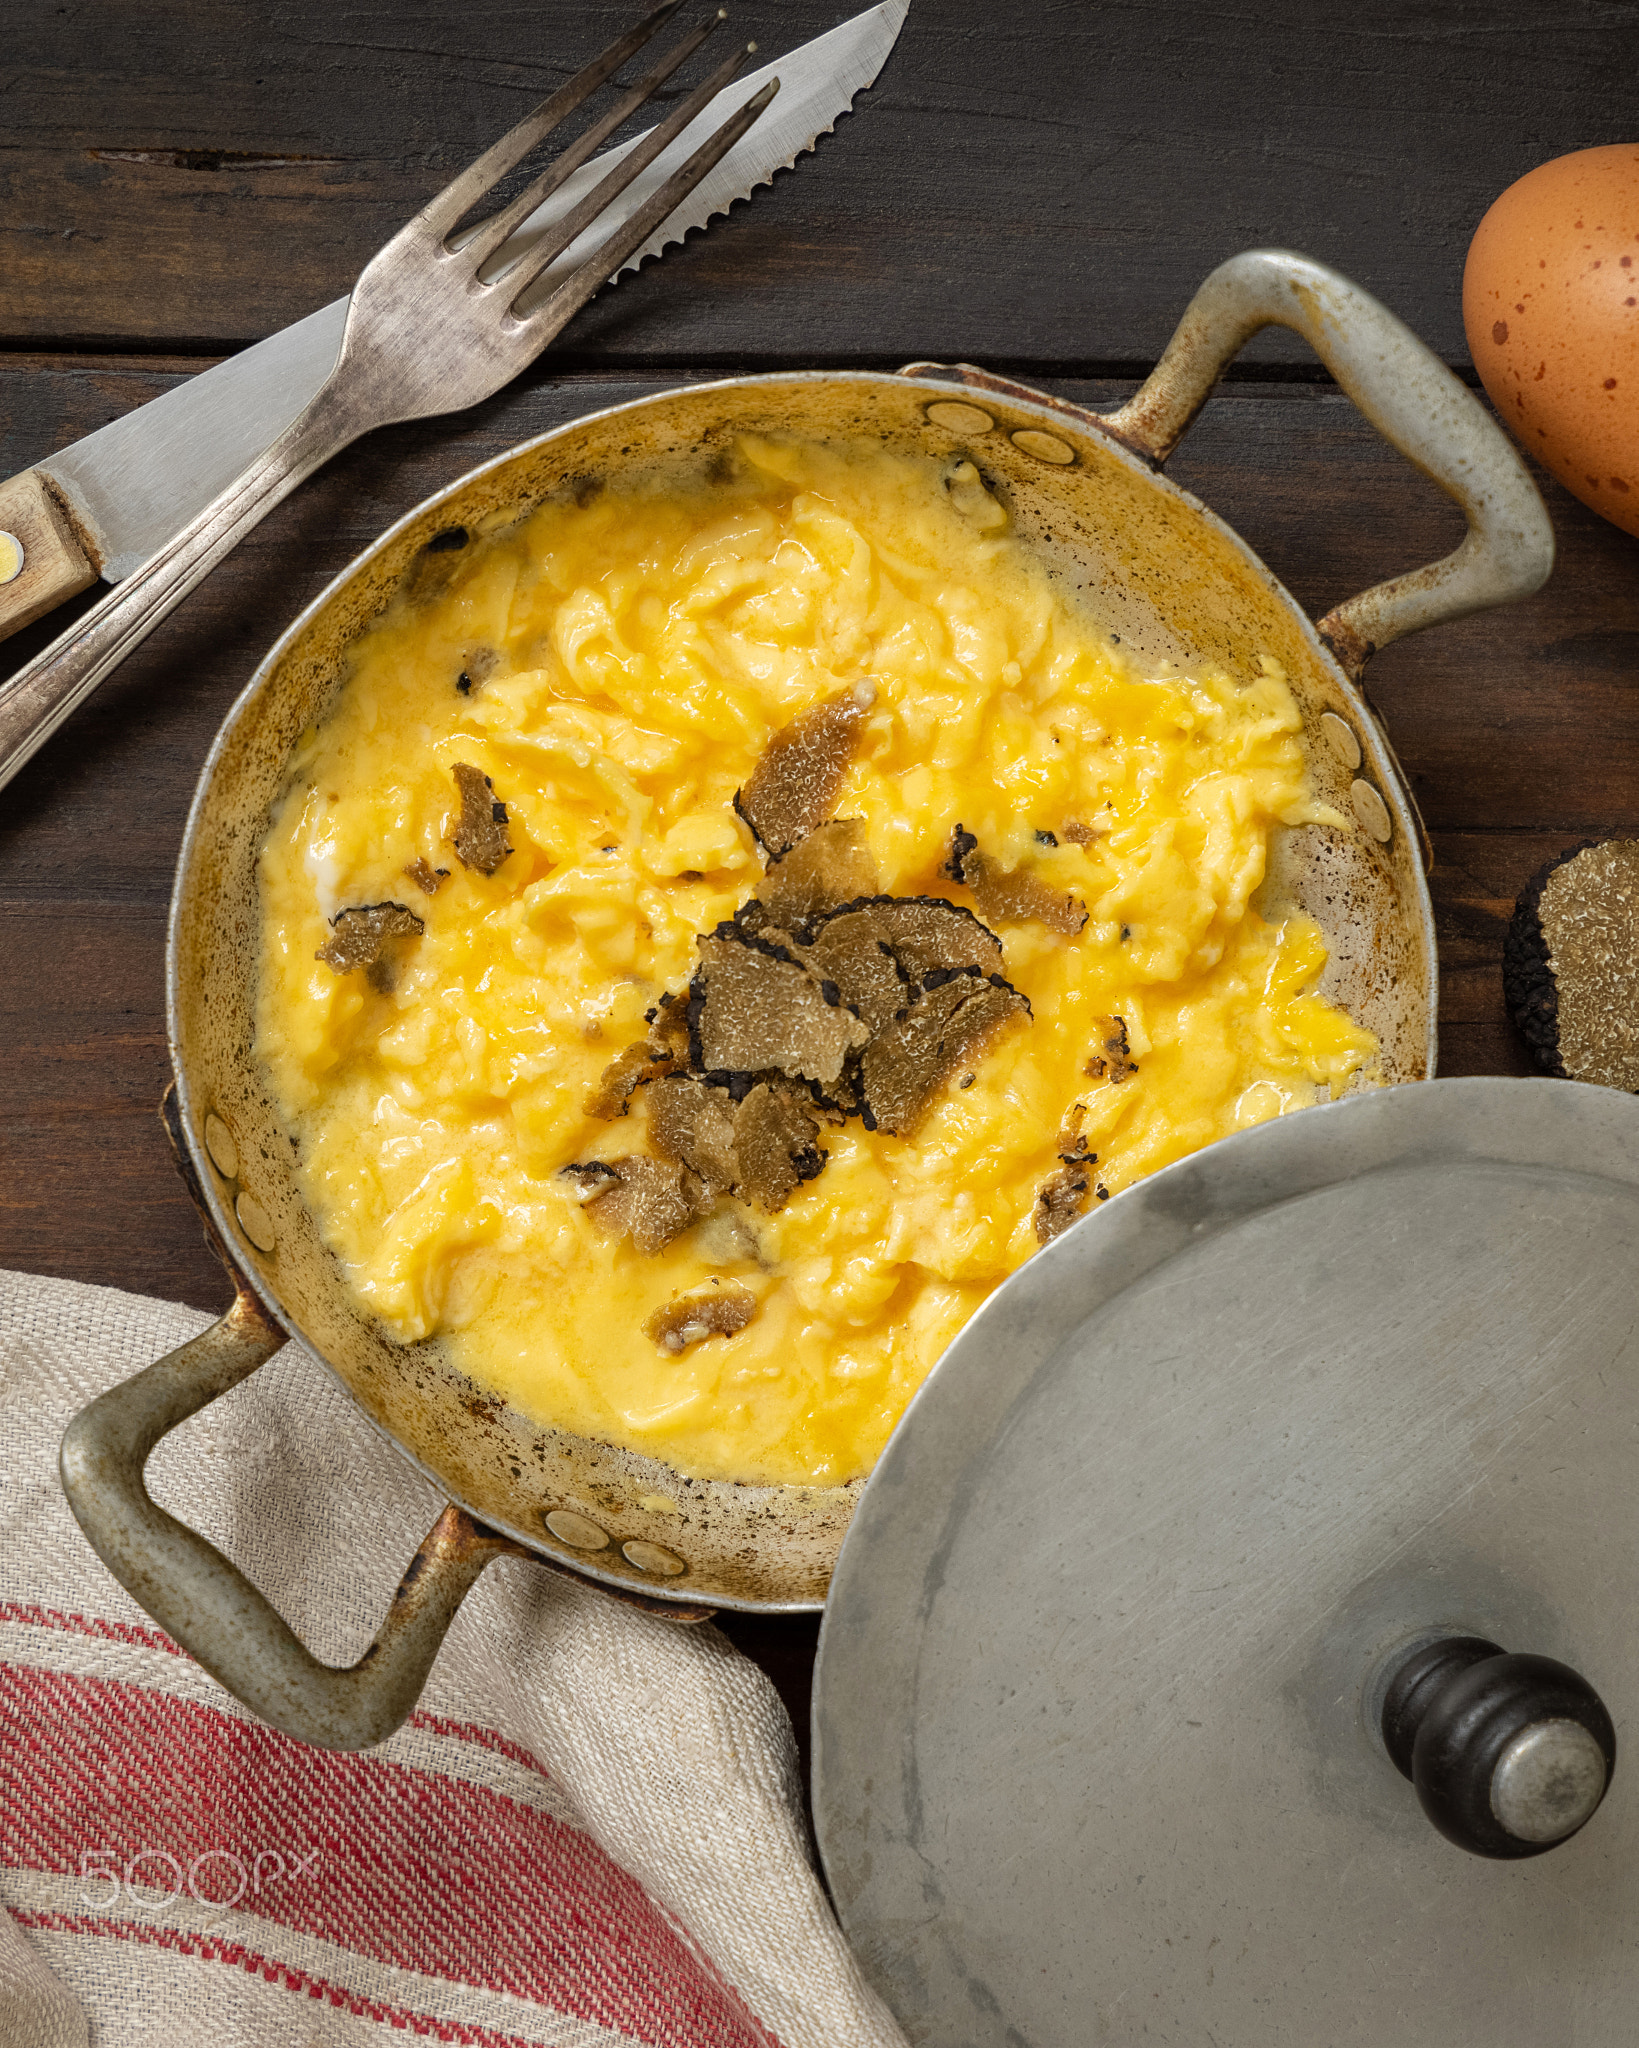 Scrambled eggs with fresh black truffles from Italy served in a frying pan, gourmet breakfast